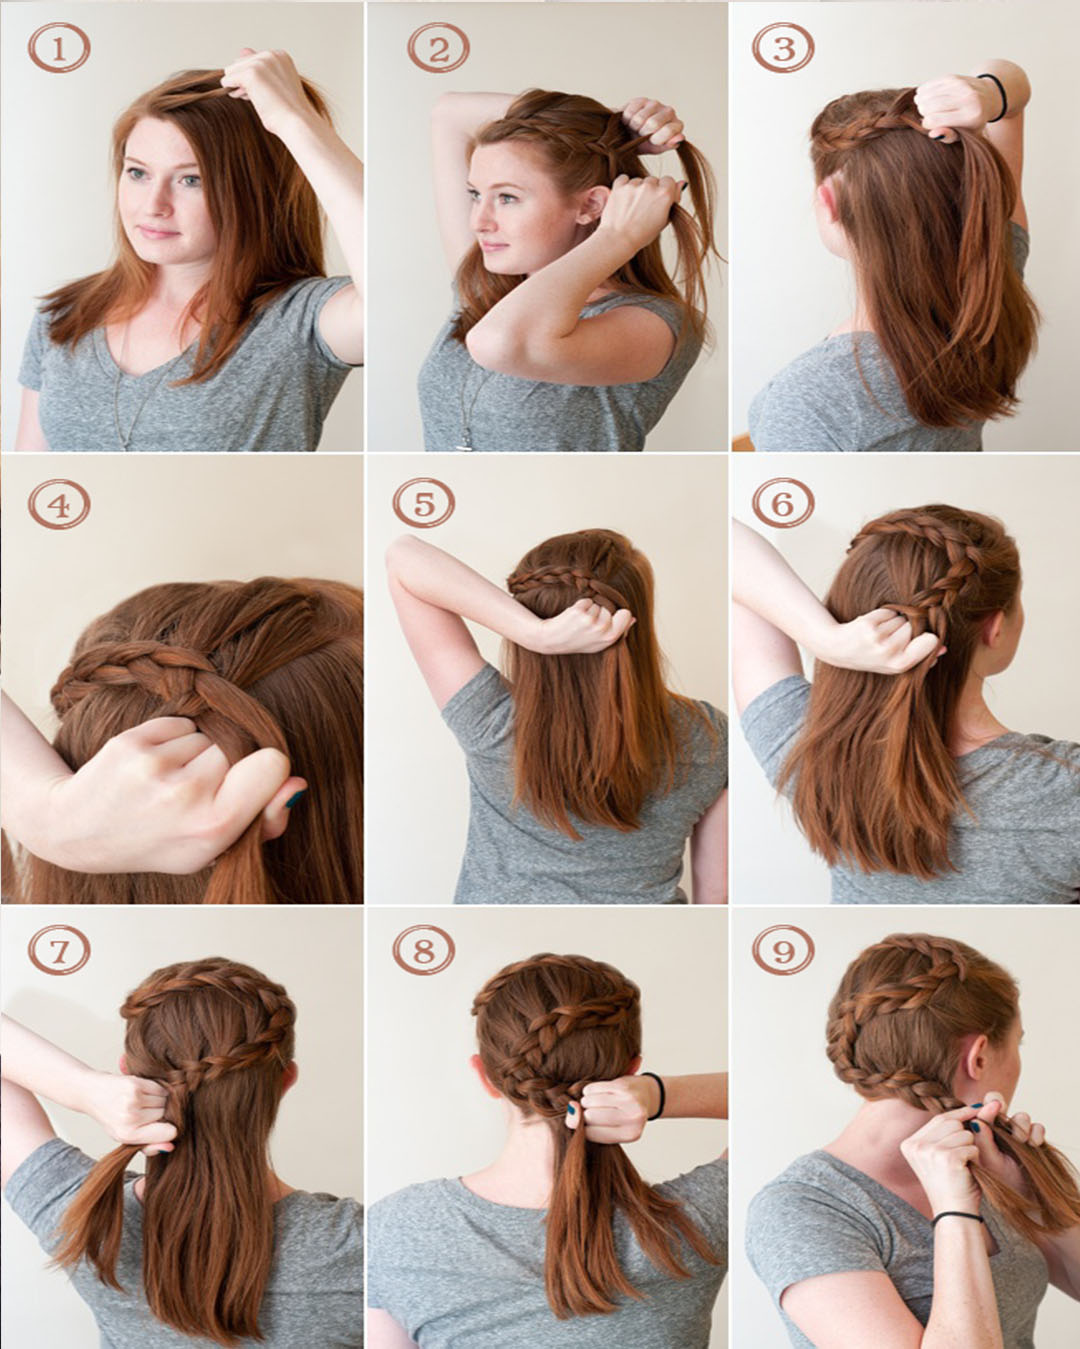 hairstyles with easy step-by-step braids and stylish tumblr